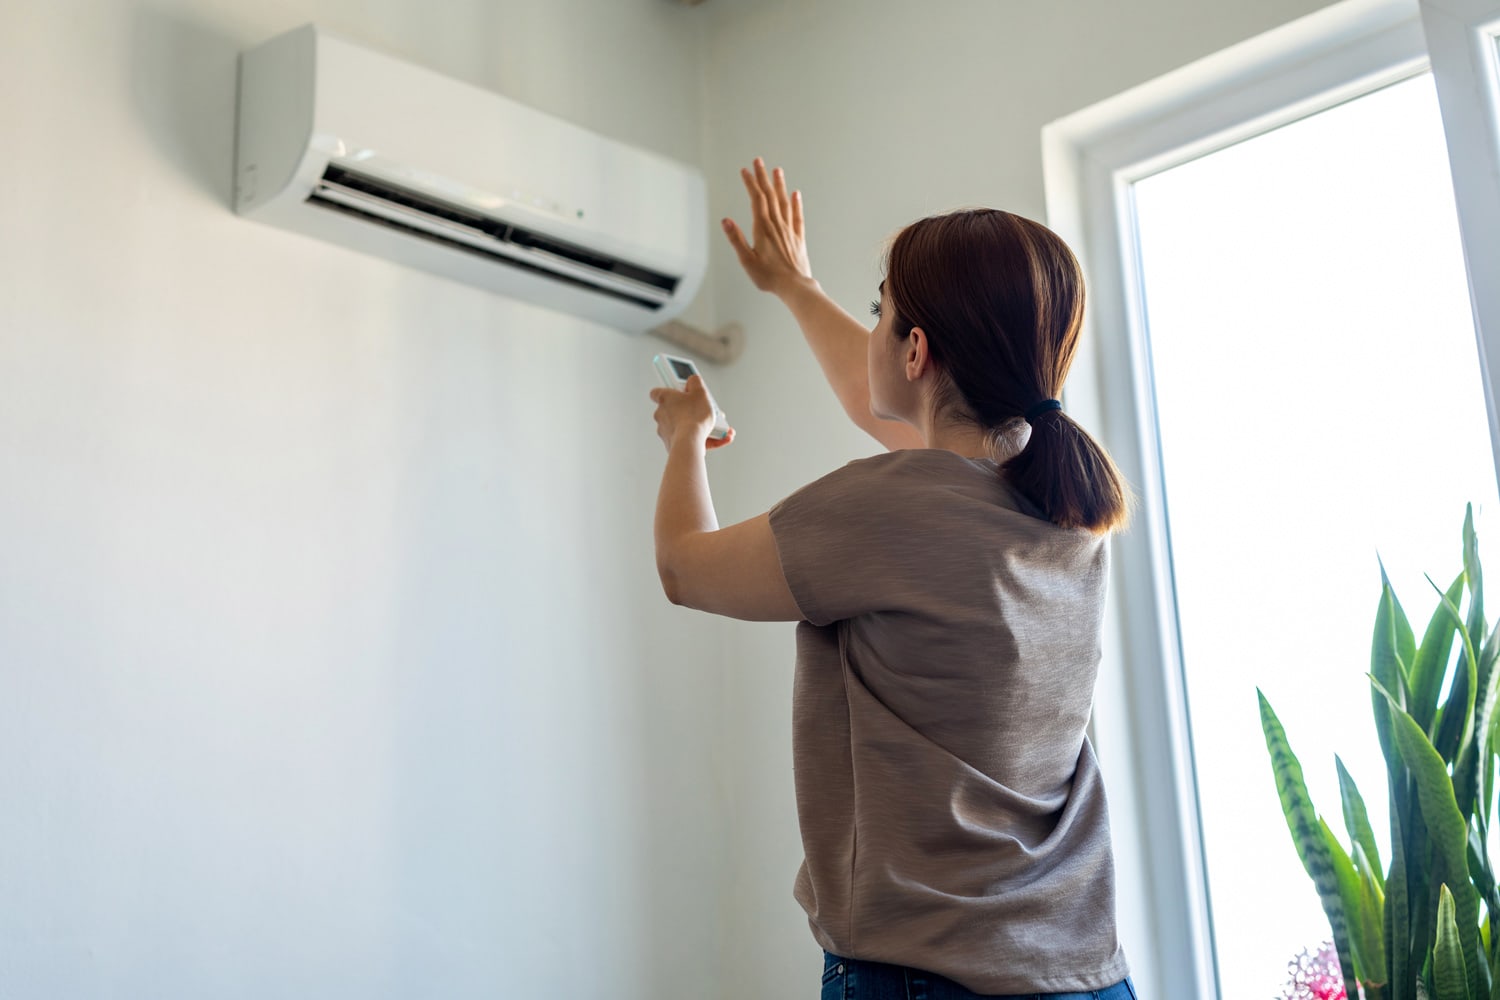 How To Fix The Error Code F8 For GE Air Conditioner